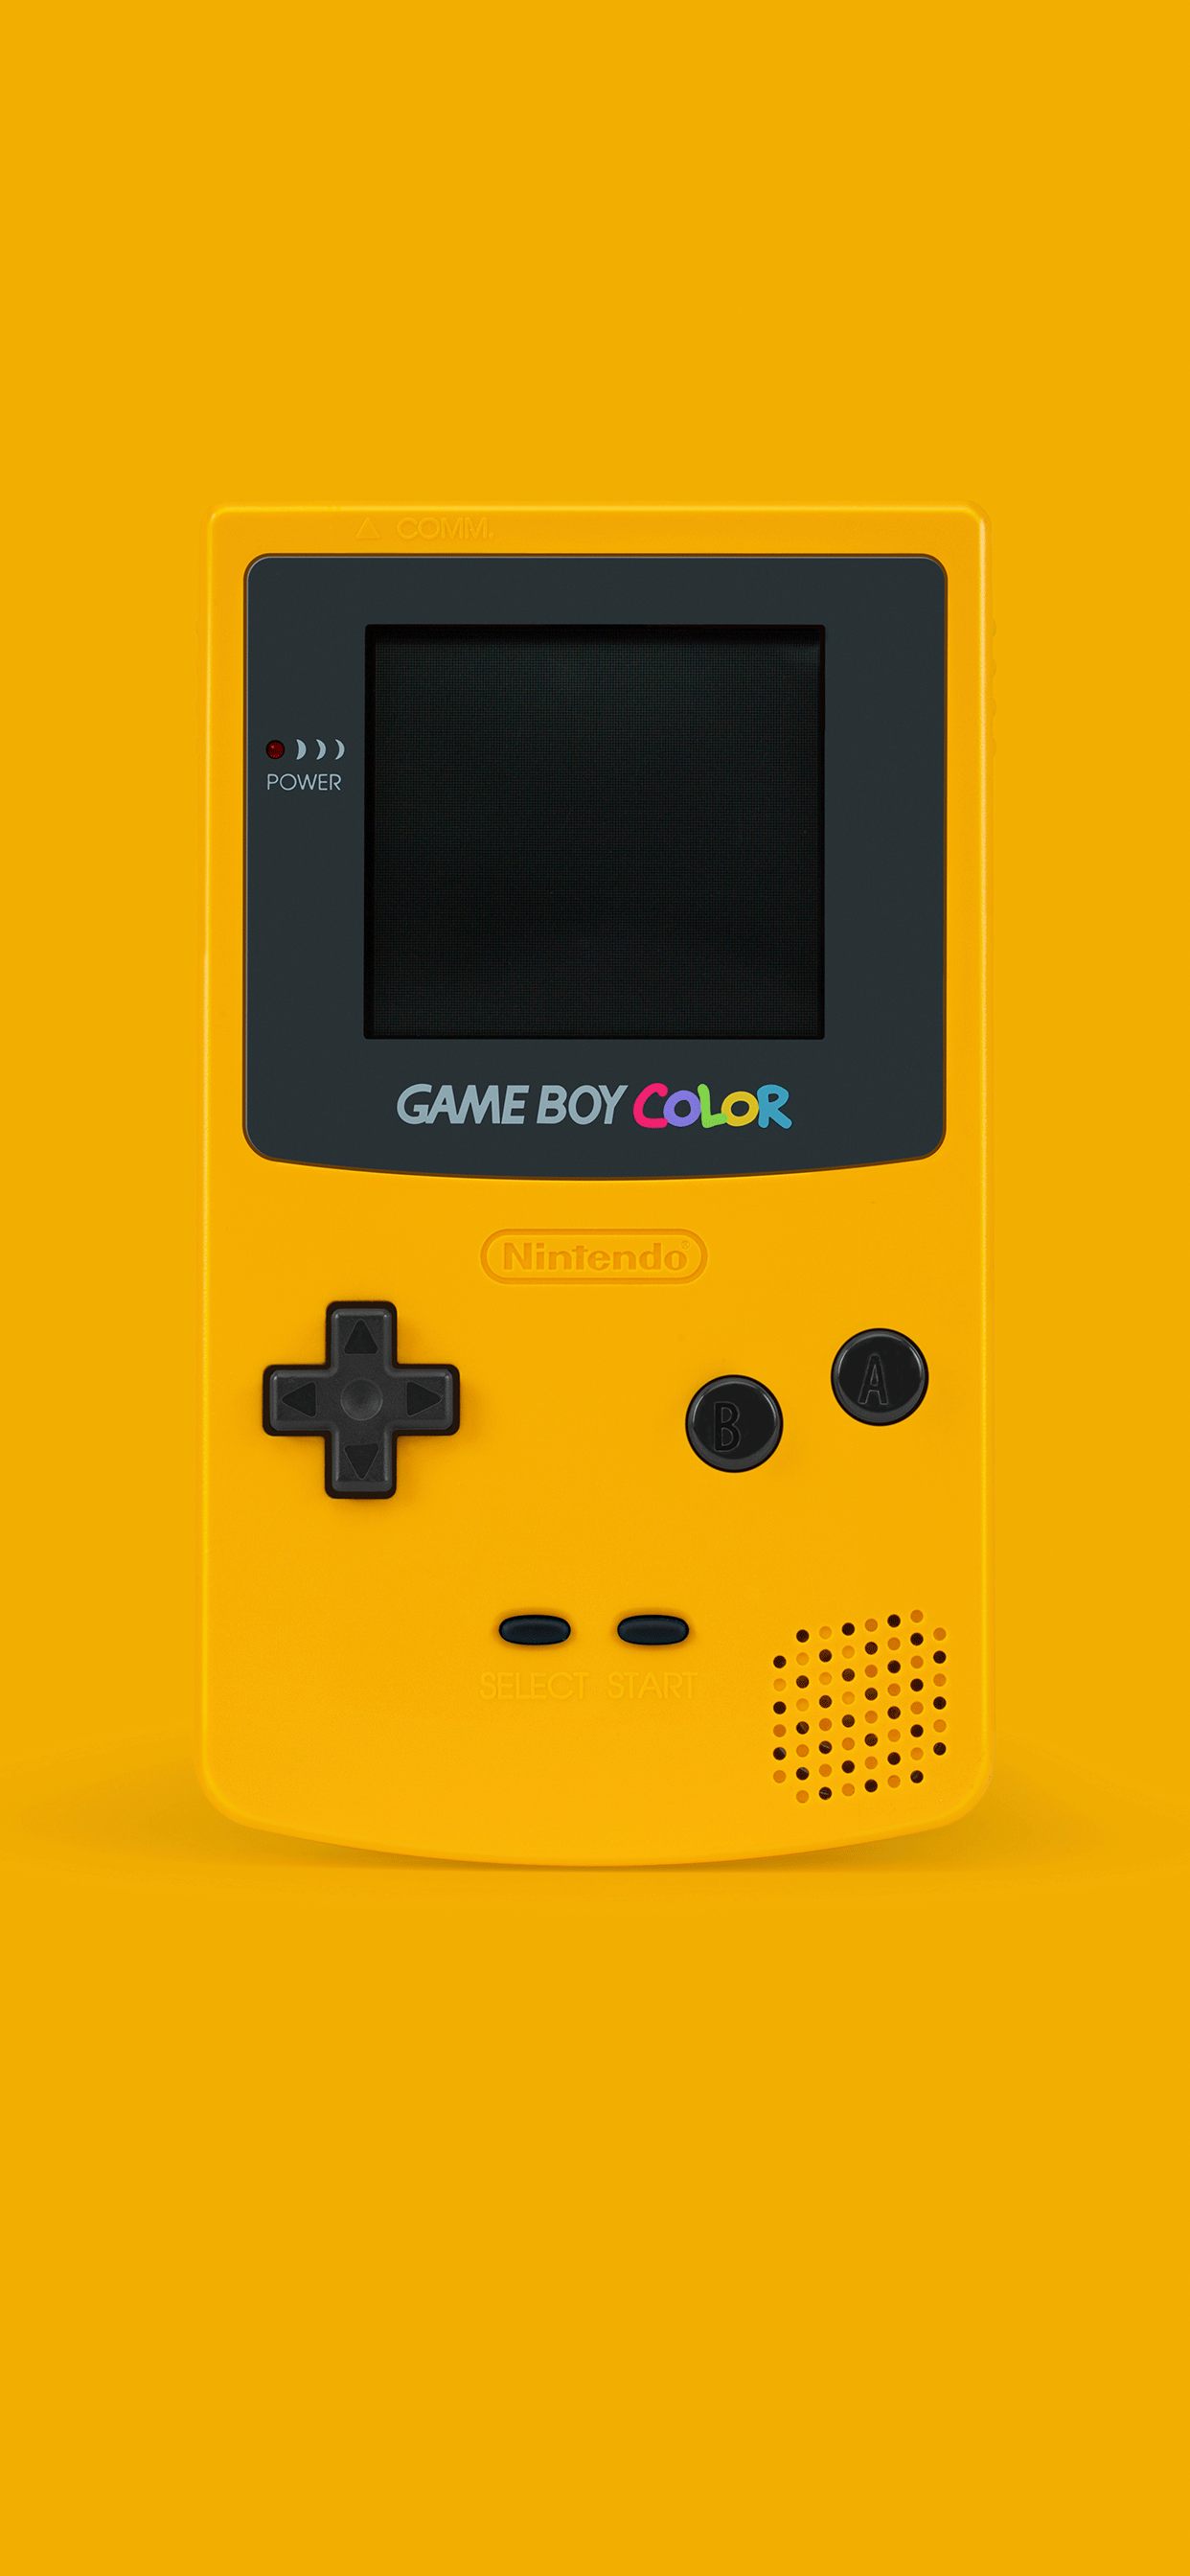 Game Boy Color Wallpaper for iPhone X, 6